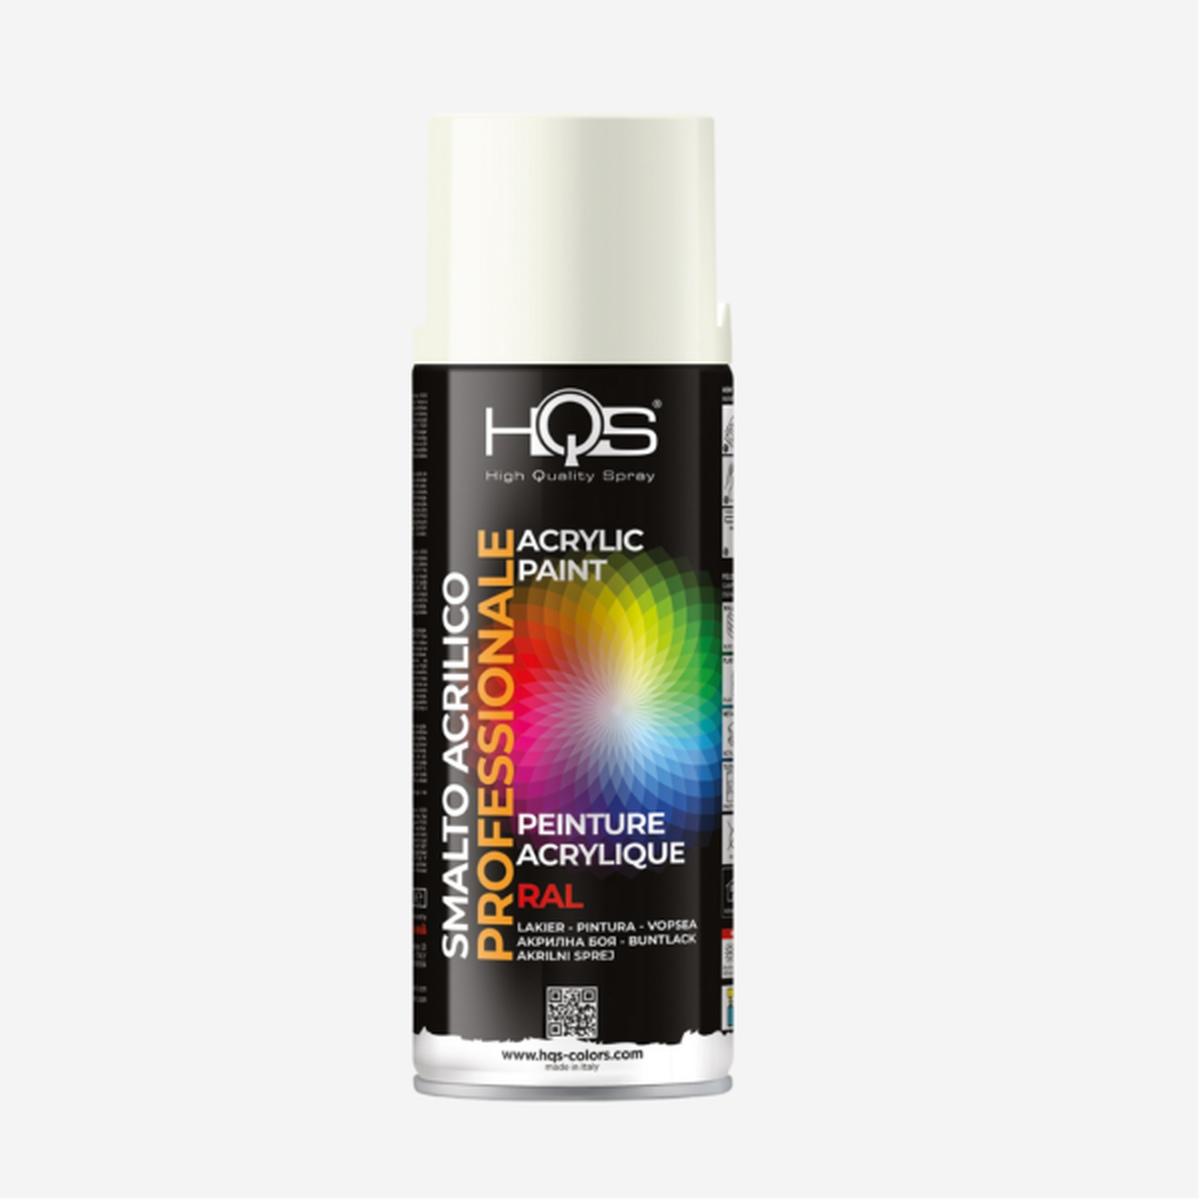 Spray ral 9010 bianco lucido 0,4l - hqs colors